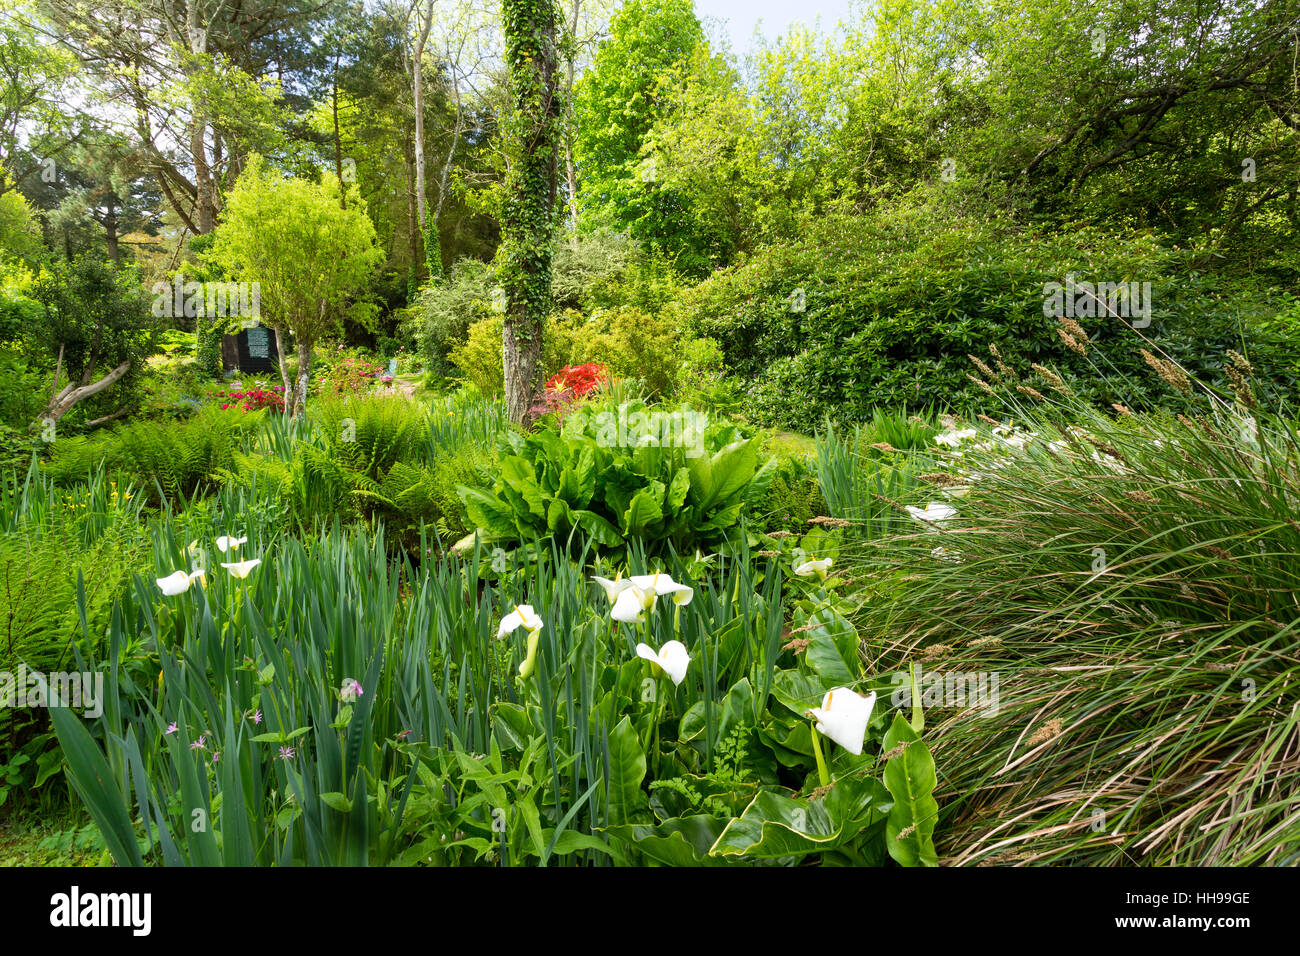 Garden in homage to Jacques Prévert. France, Manche , Saint-Germain-des-Vaux, calla lily (Zantedeschia aethiopica), large leaves of Lysichiton... Stock Photo